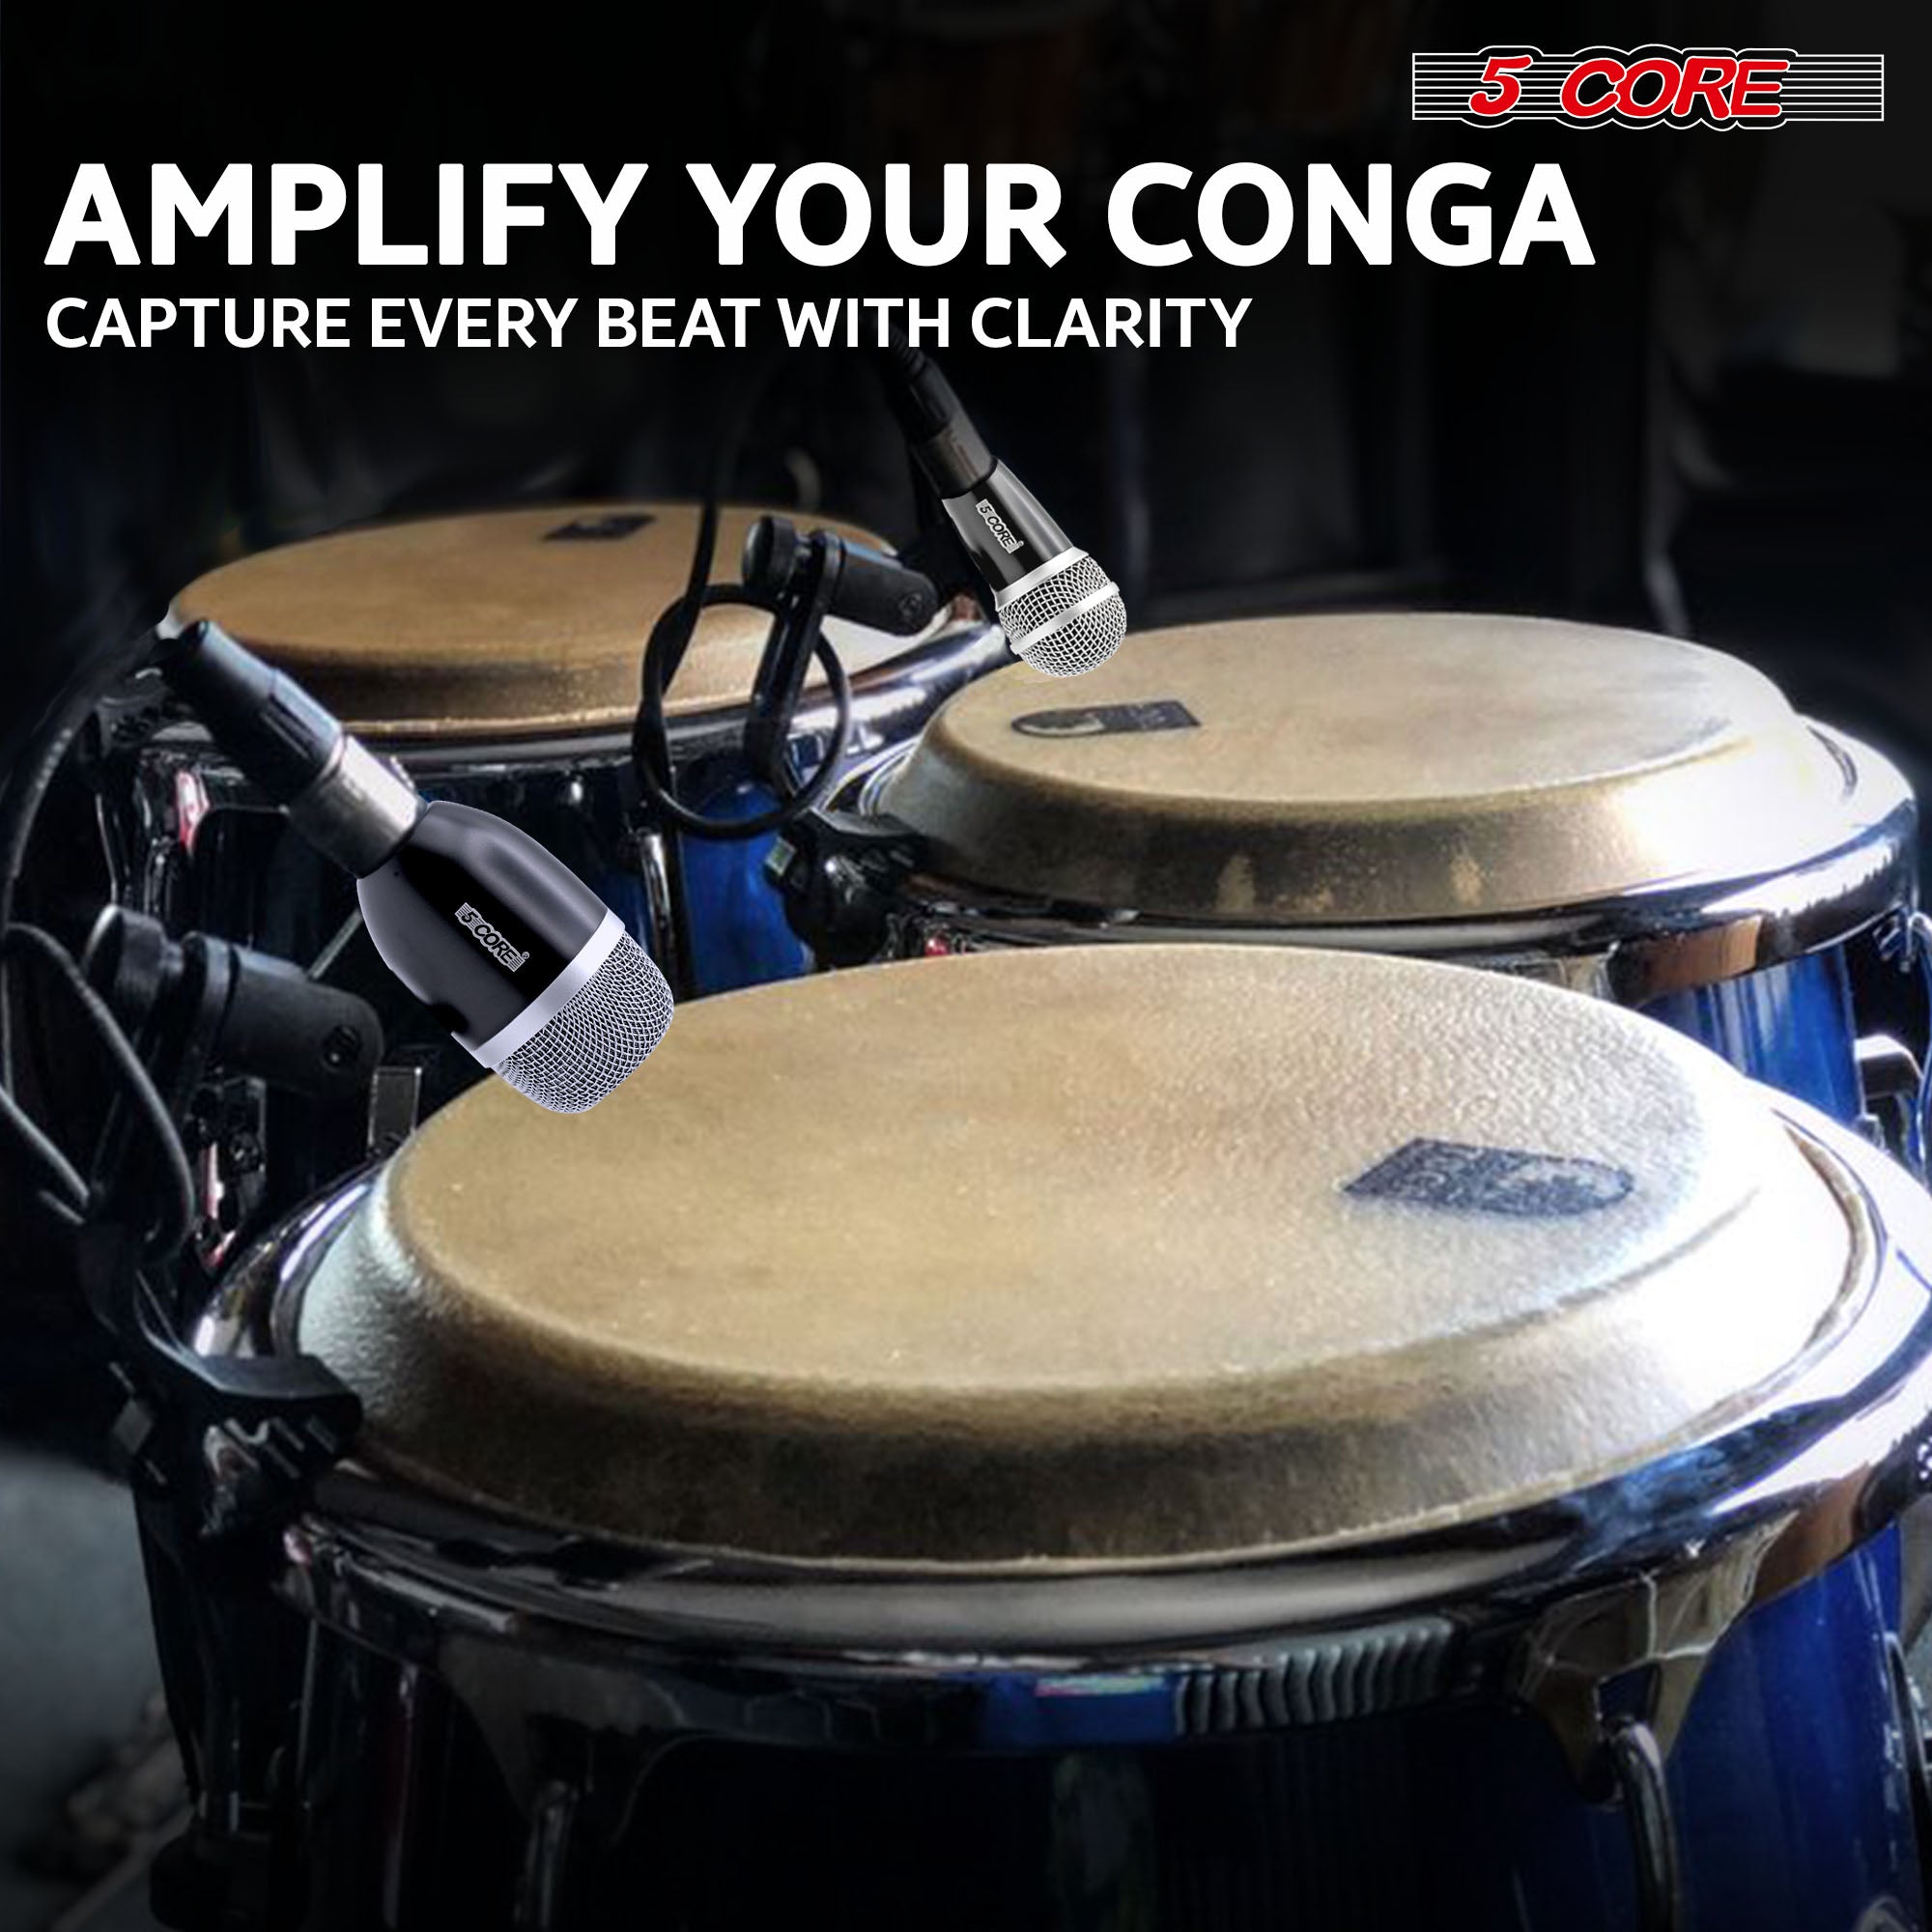 Congo microphone serves a unique purpose, ensuring optimal sound capture and reproduction for different instruments in your ensemble.